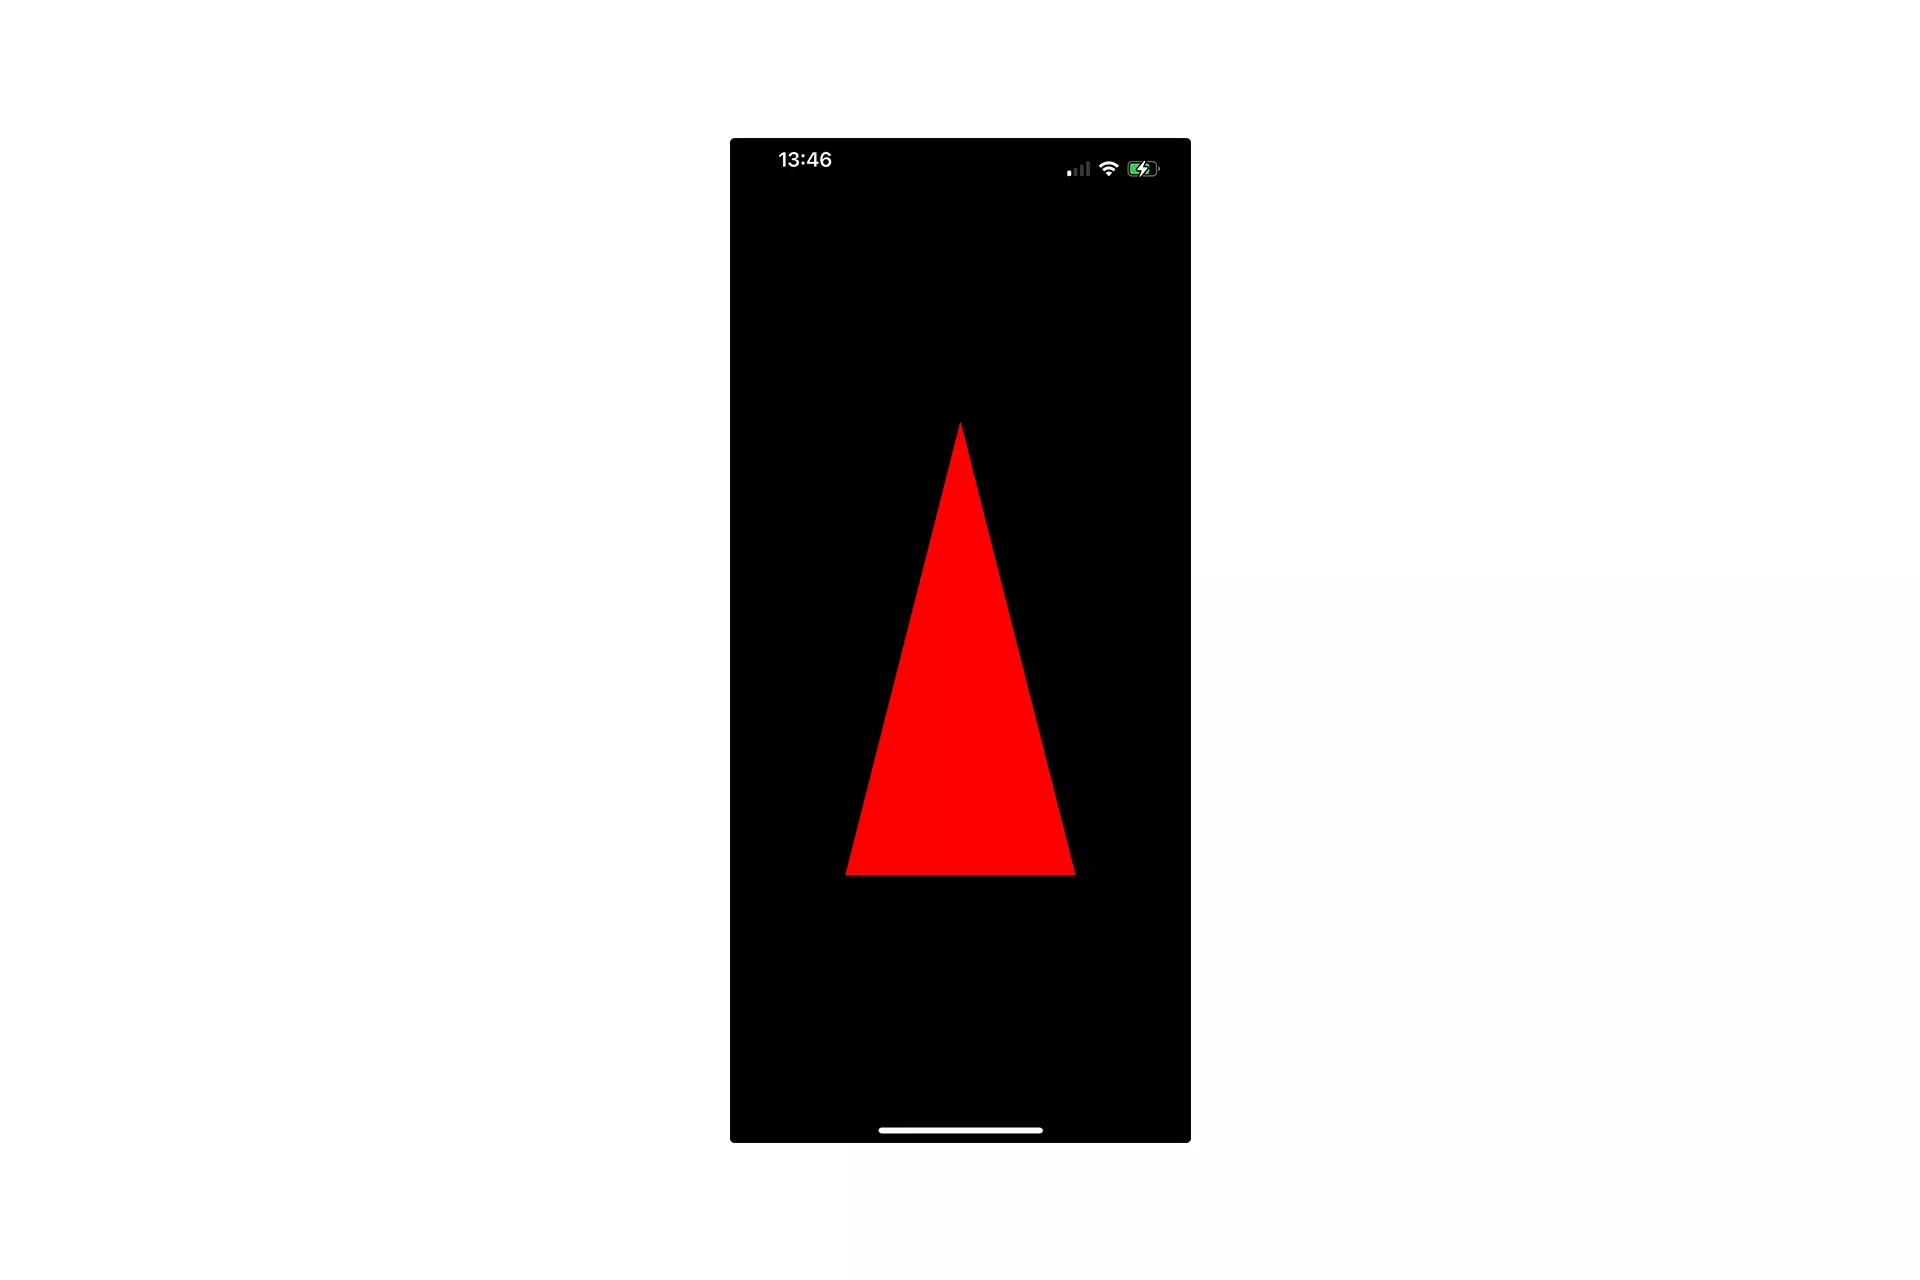 red triangle outline